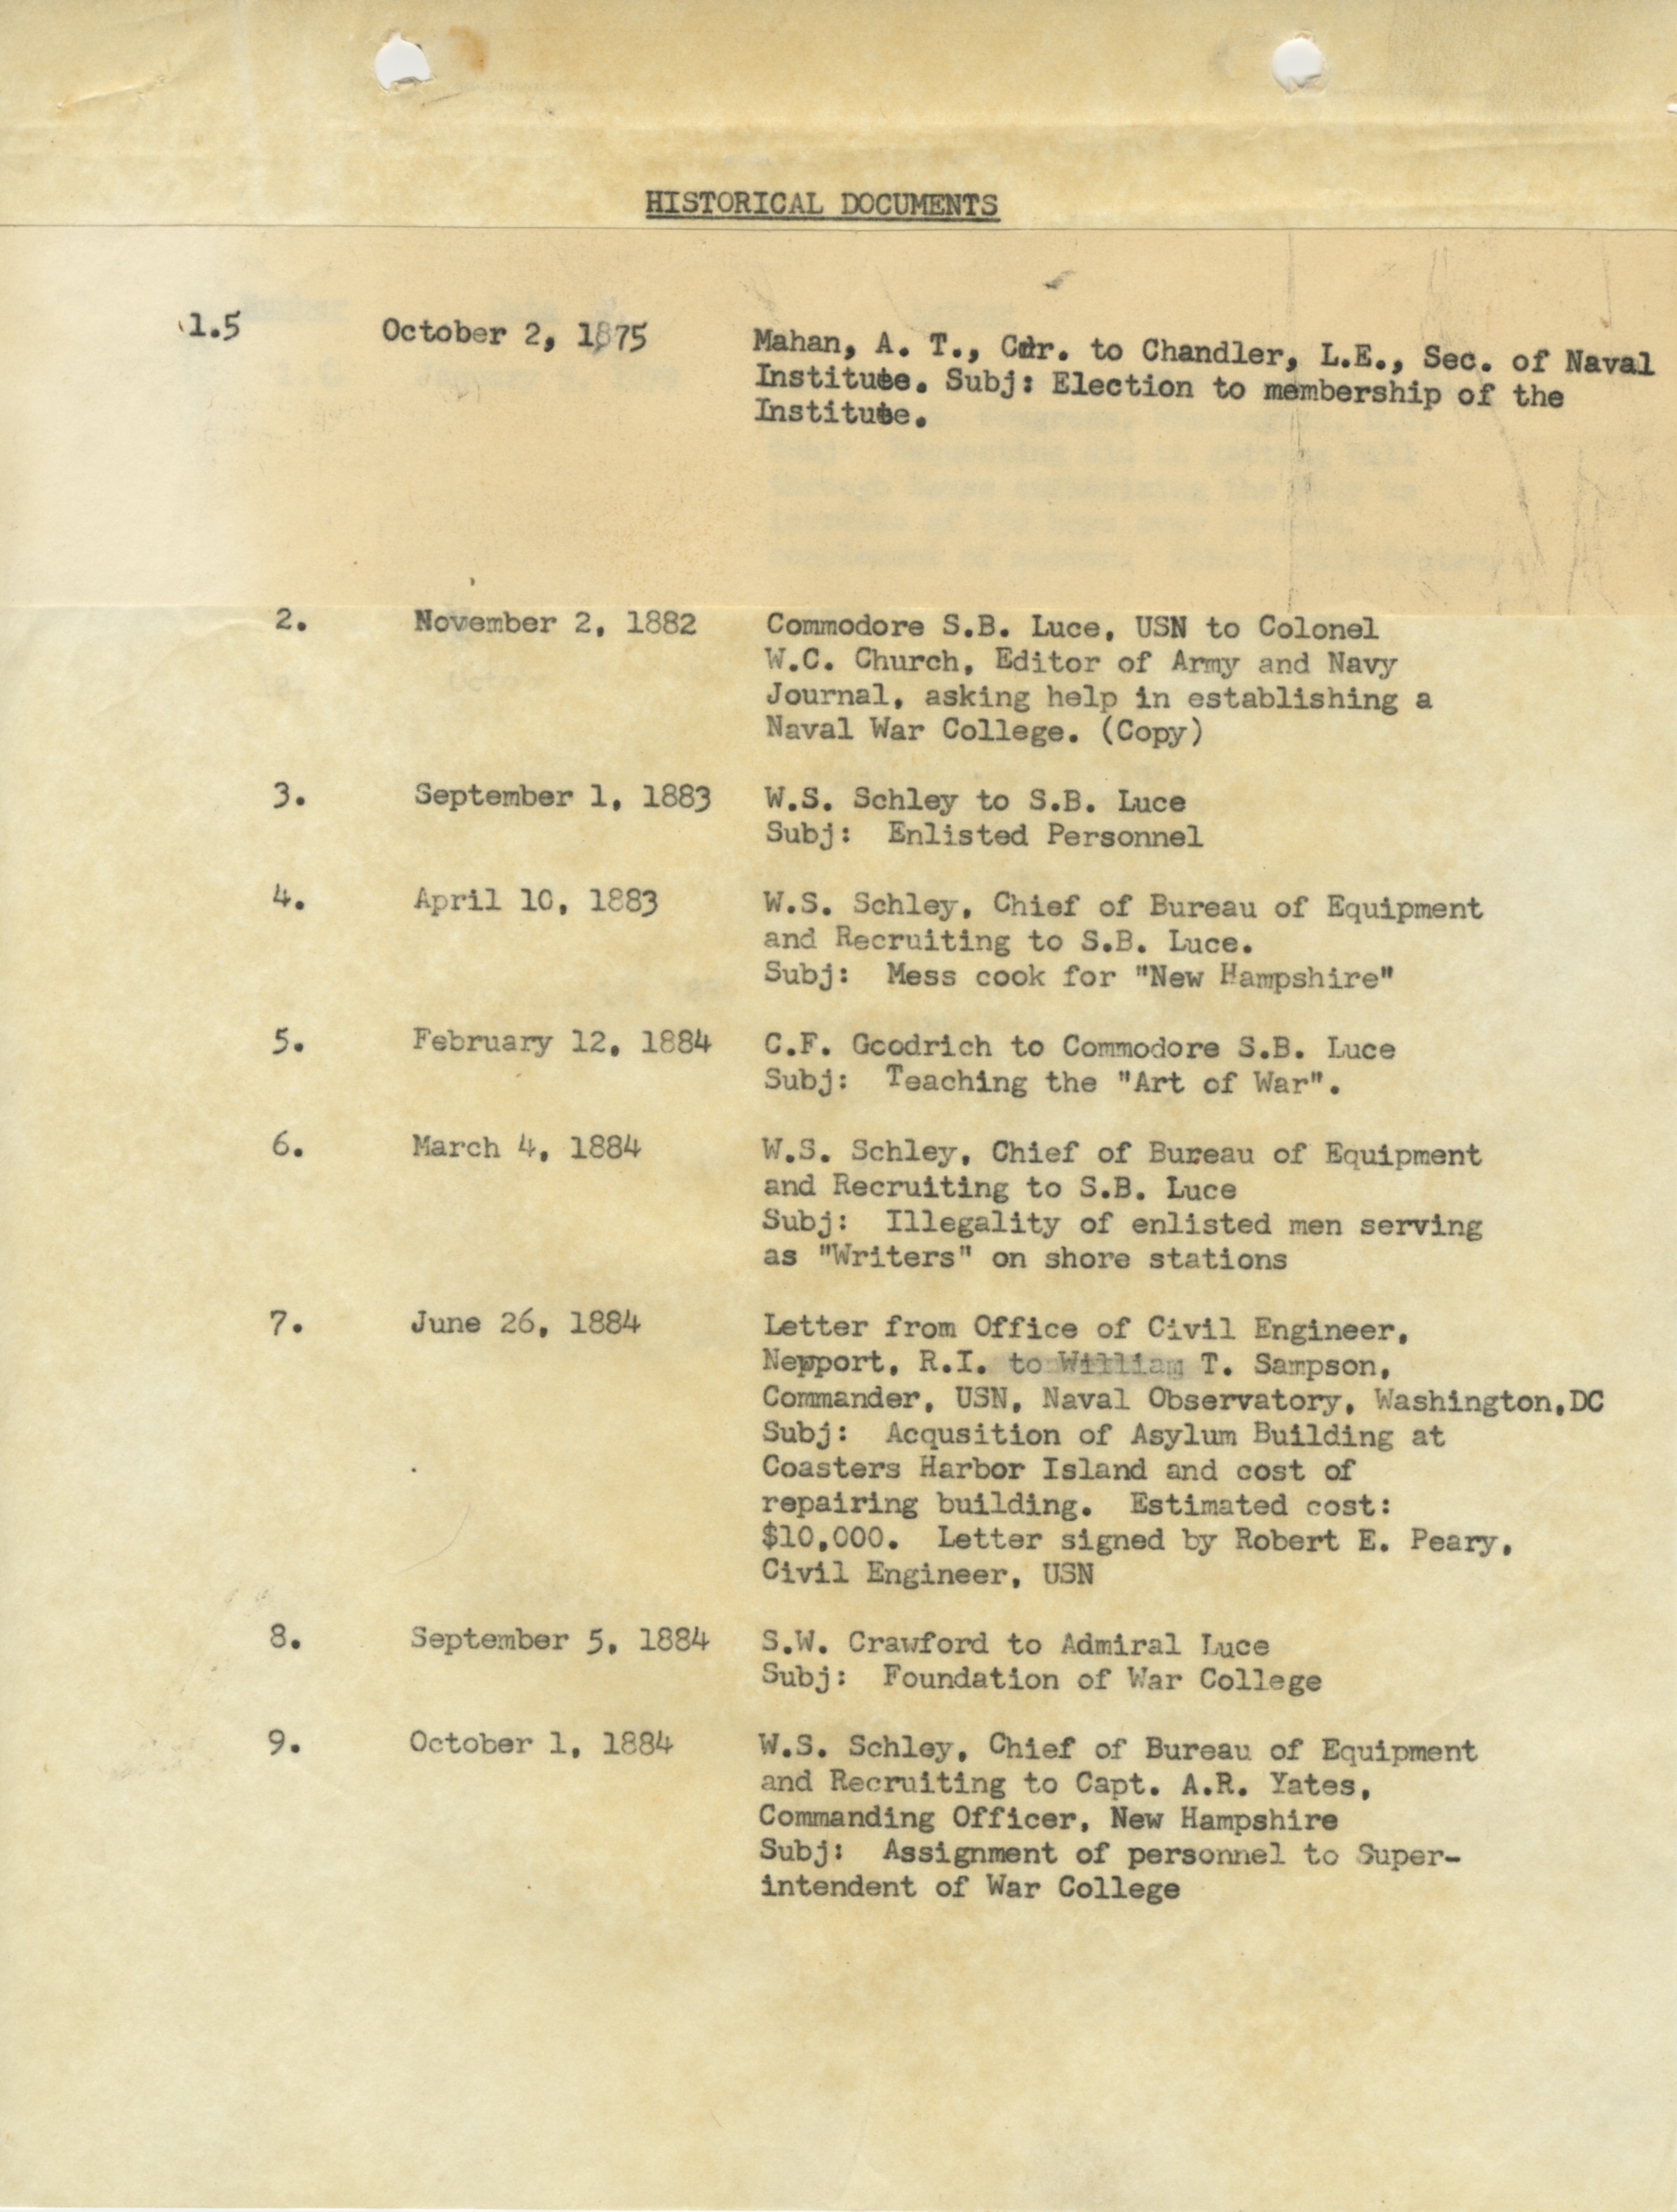 Inventories of documents in RG 1, undated